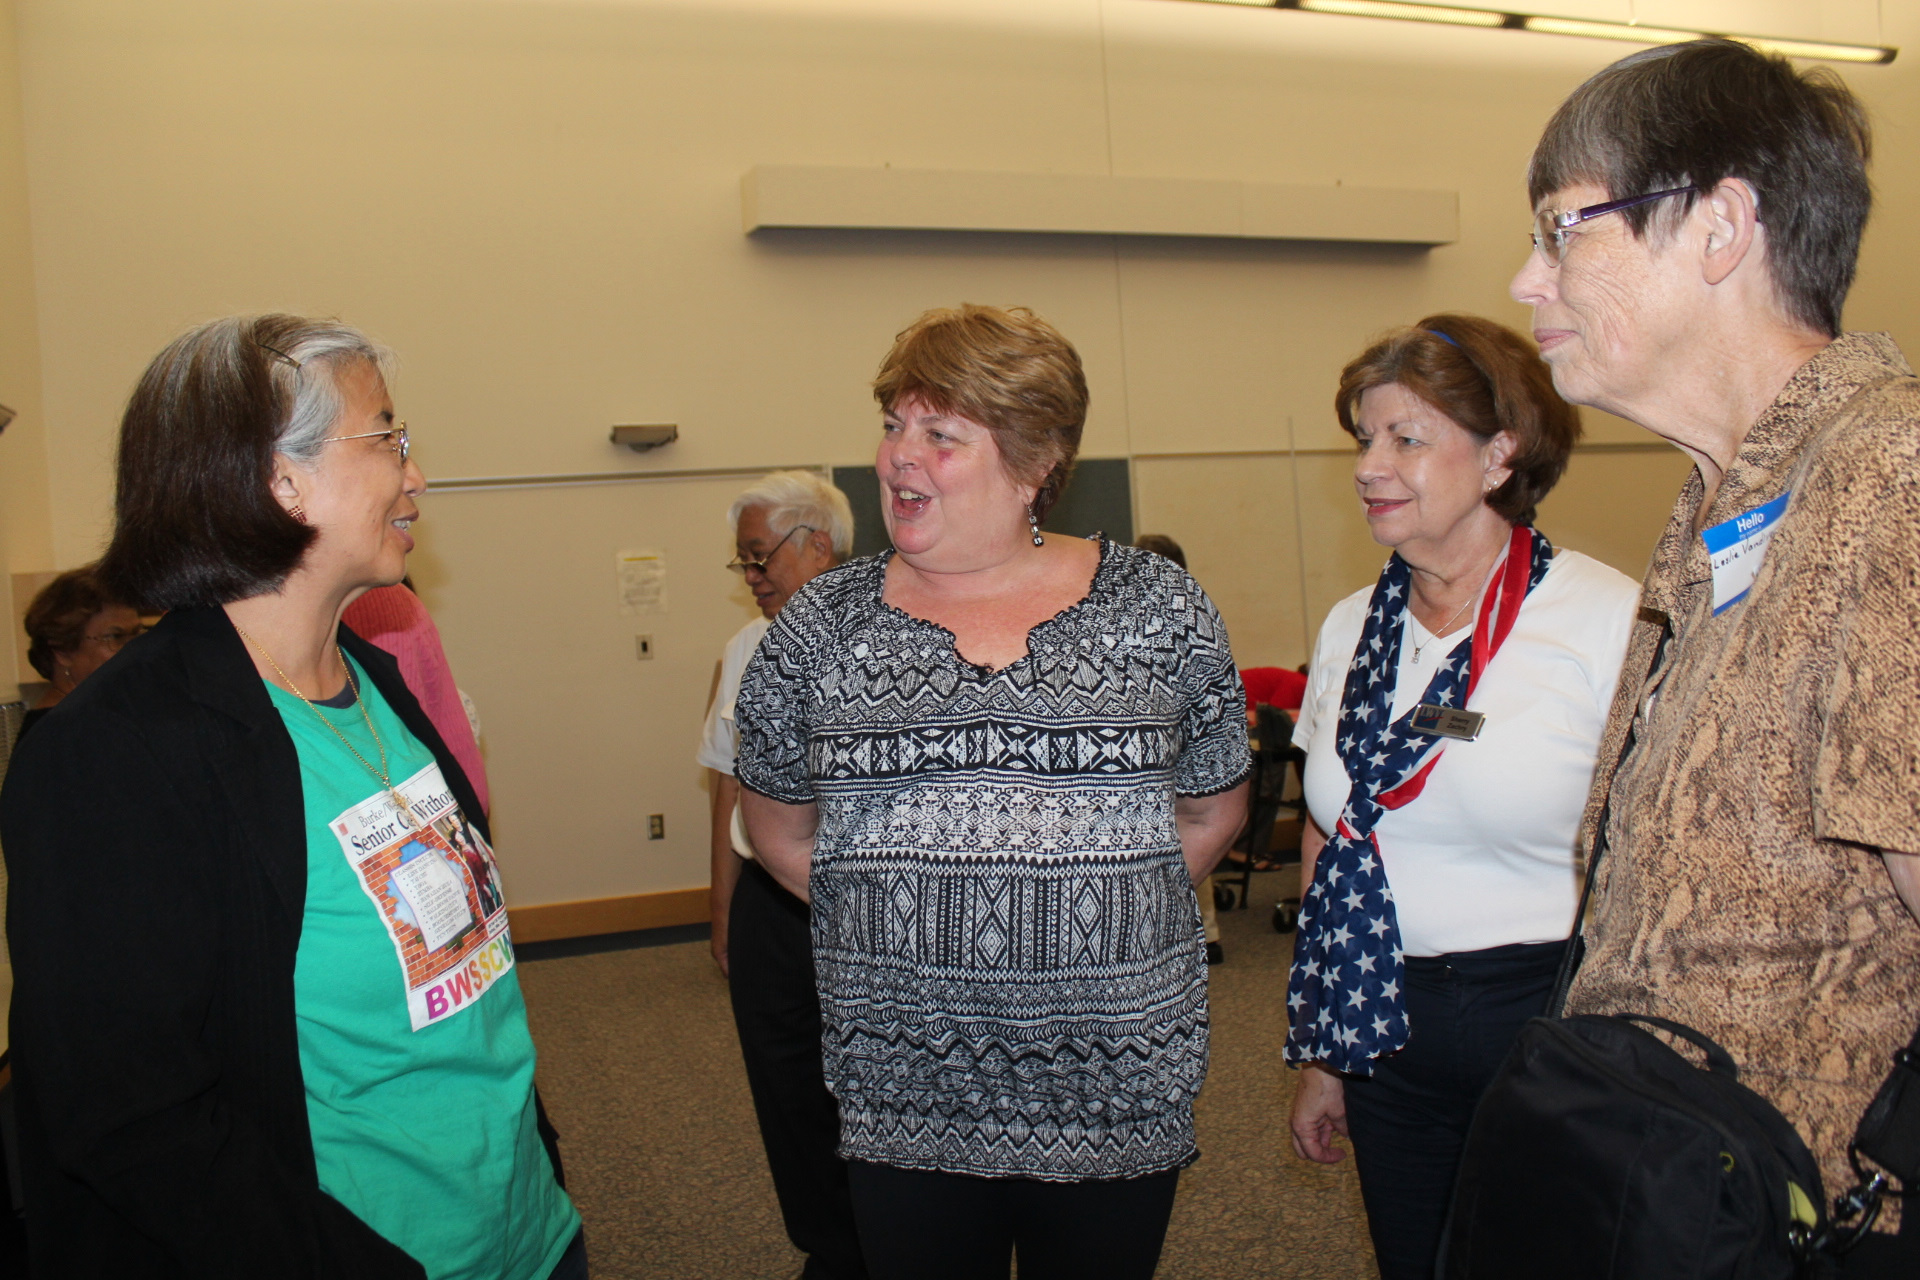 Cora Foley (left) engages in a post-candidates forum conversation with members of the League of Women Voters, from right, Leslie Vandivere, Sherry Zachry and Dianne Blais.